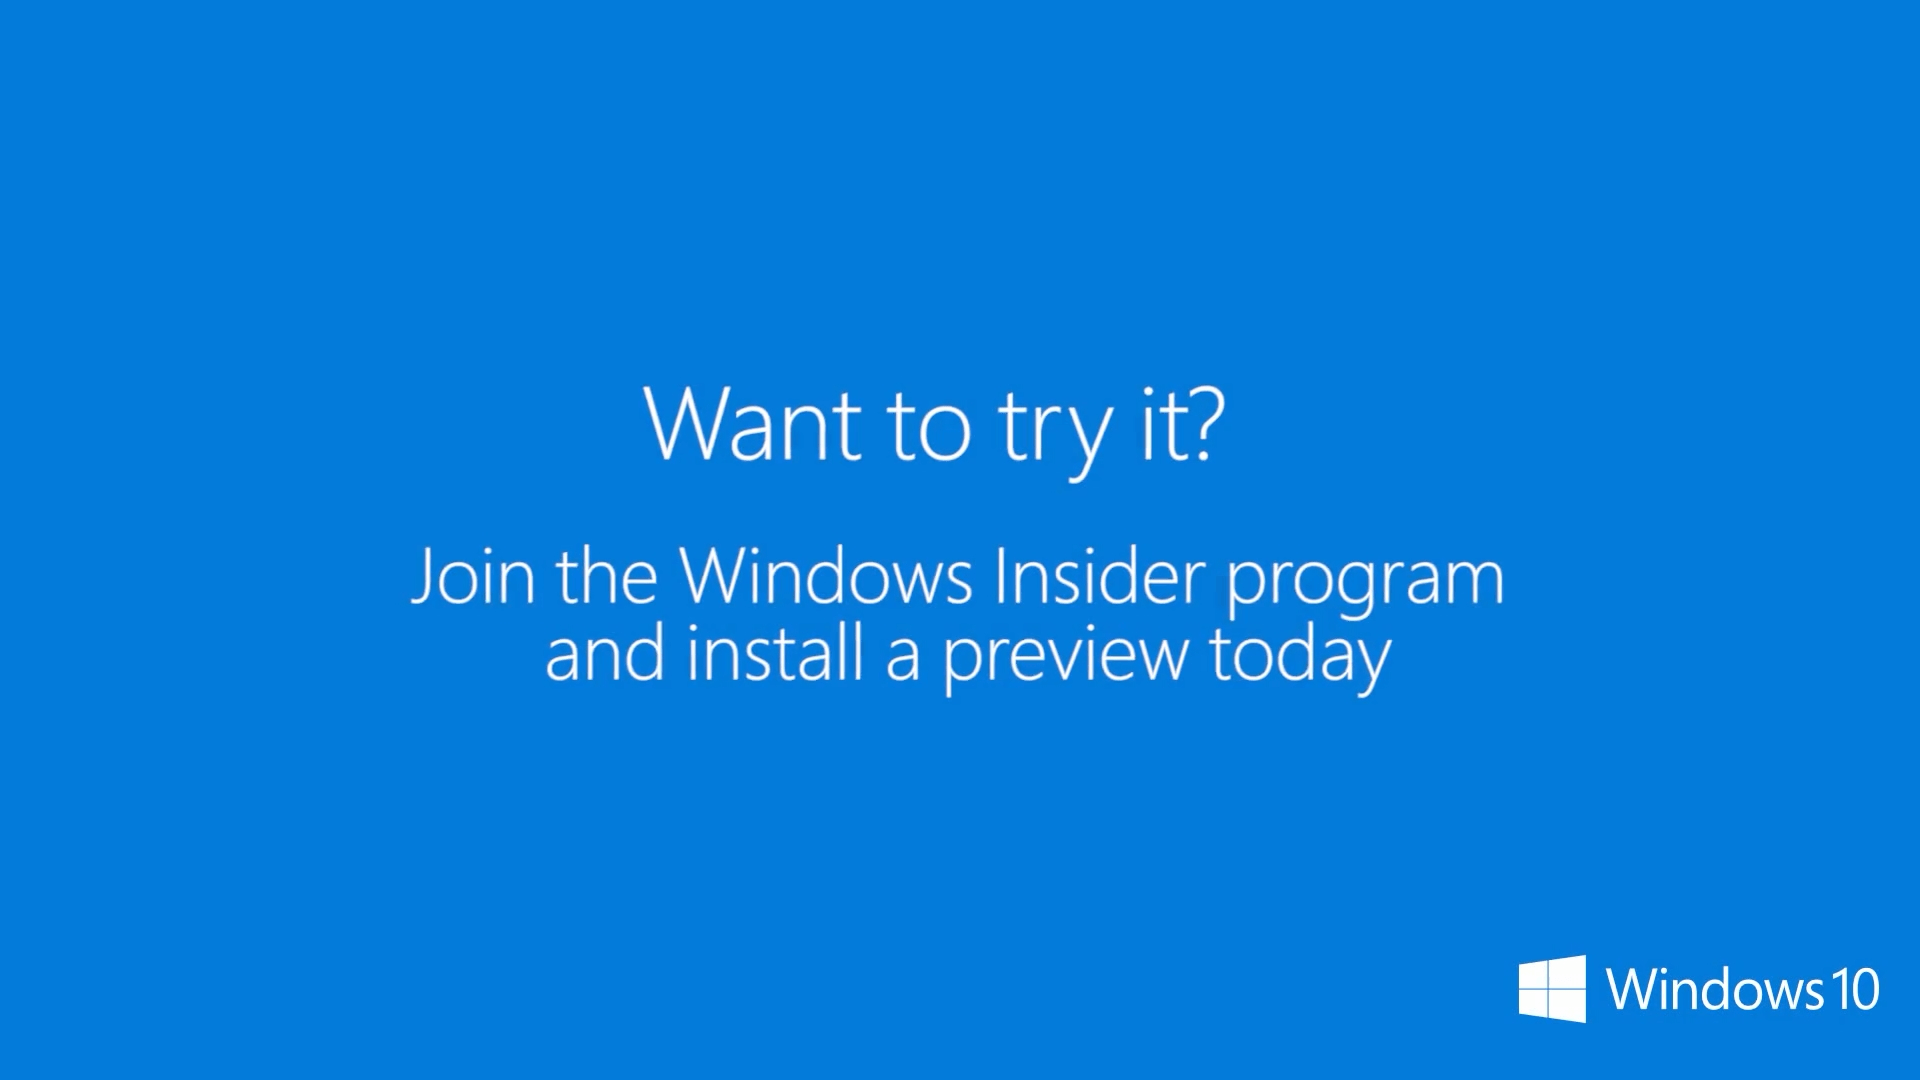 Windows Insider Program is a disastrous upgrade | Accurate ...
